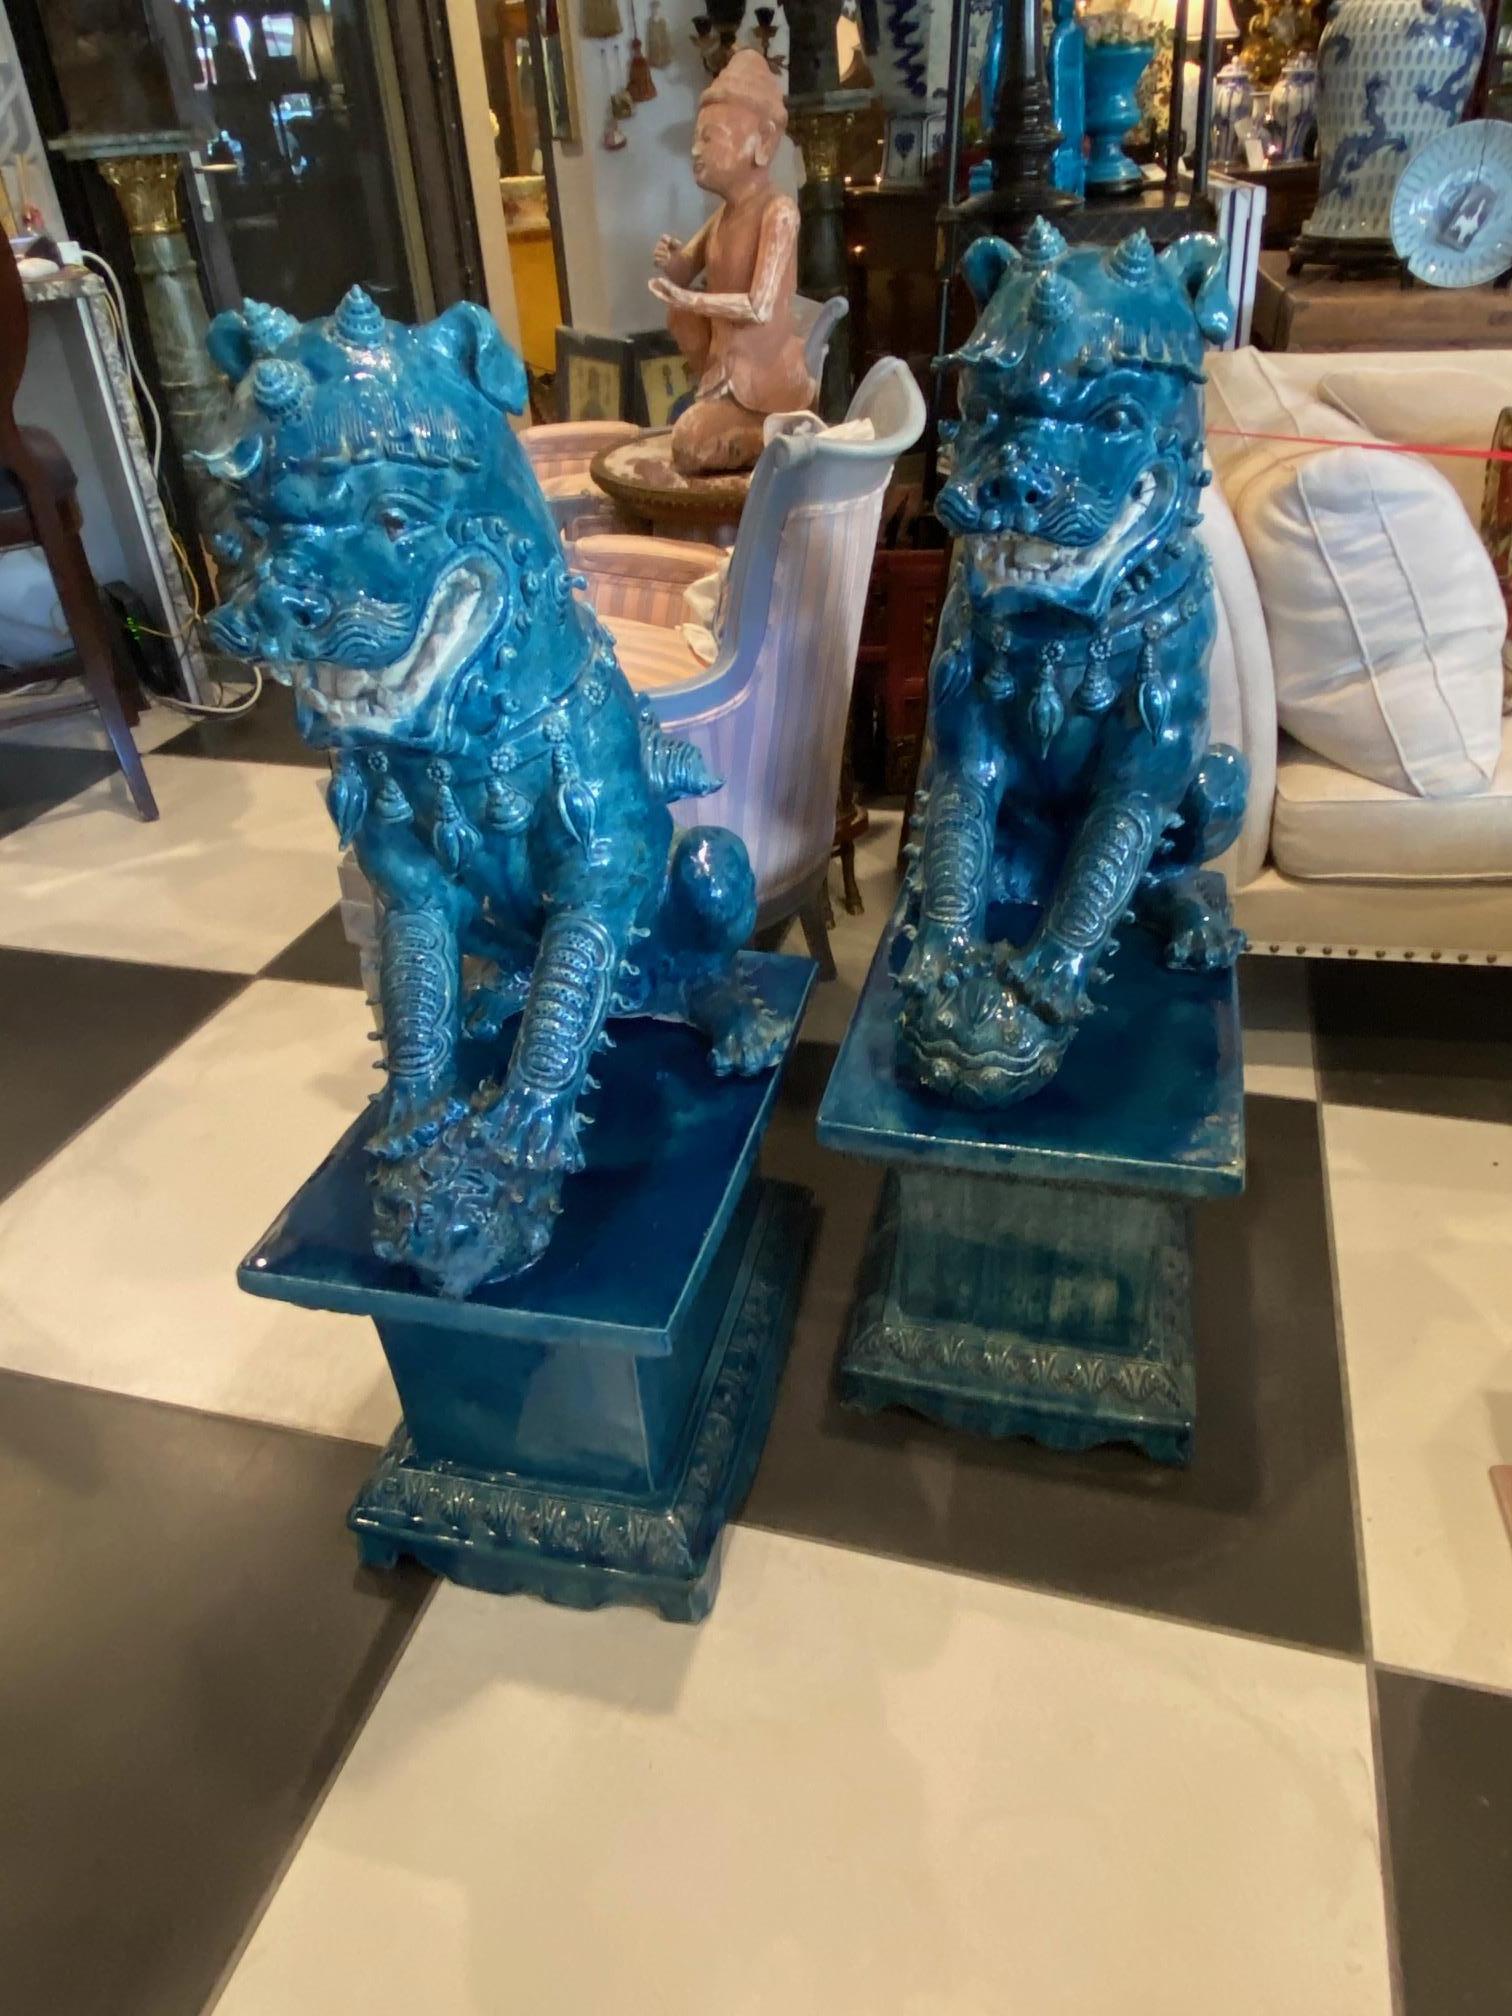 The pair of turquoise glazed monumental foo dogs on separate stands are well done month open, tongue extended, male holding the world and the female holding the baby. Tails open a lot of detail in both.